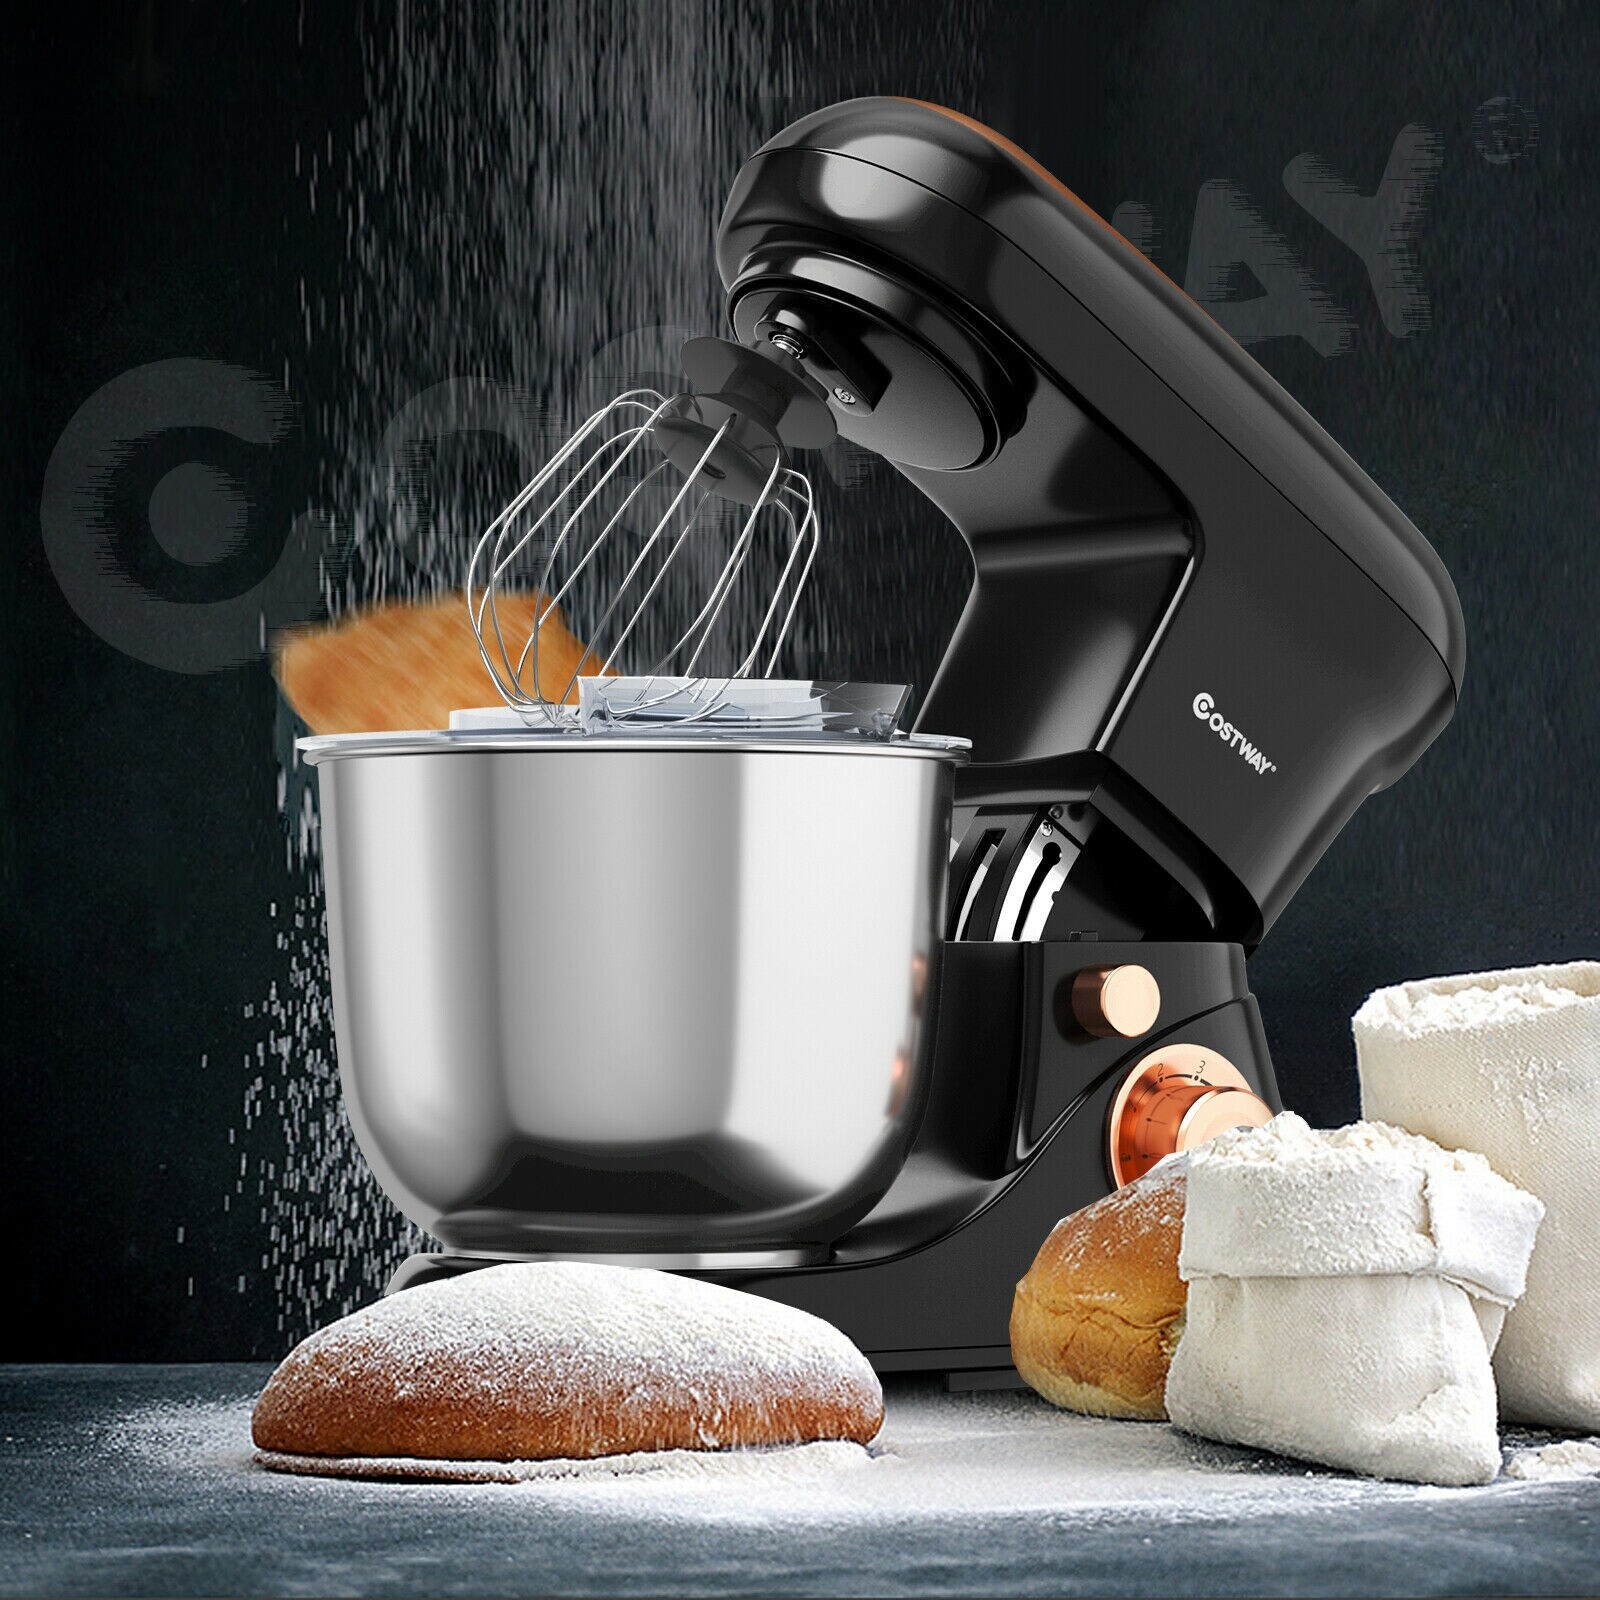 CASAINC 5.3 Qt Stand Kitchen Food Mixer 6 Speed with Dough Beater in the Stand Mixers department at Lowes.com